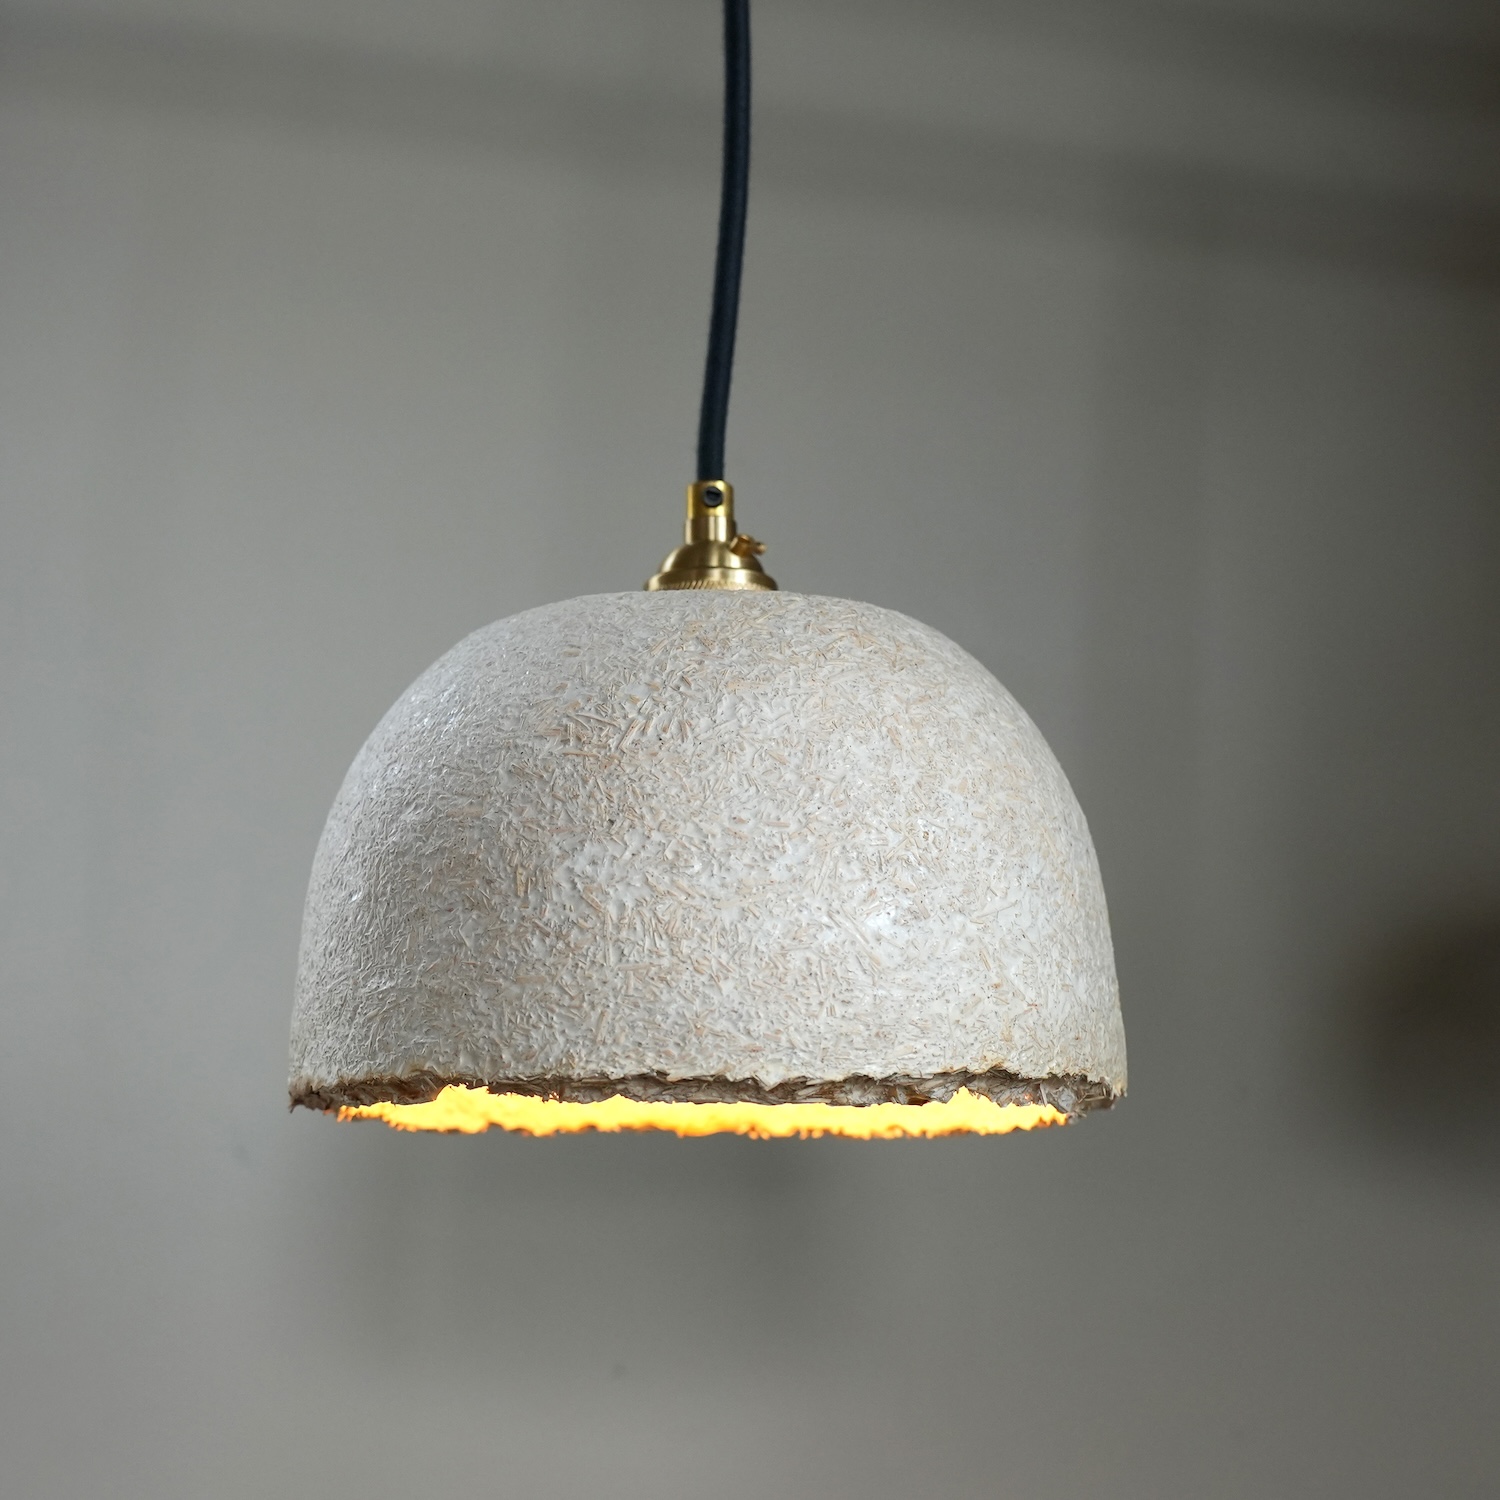 a white pendant lamp with a textured surface.